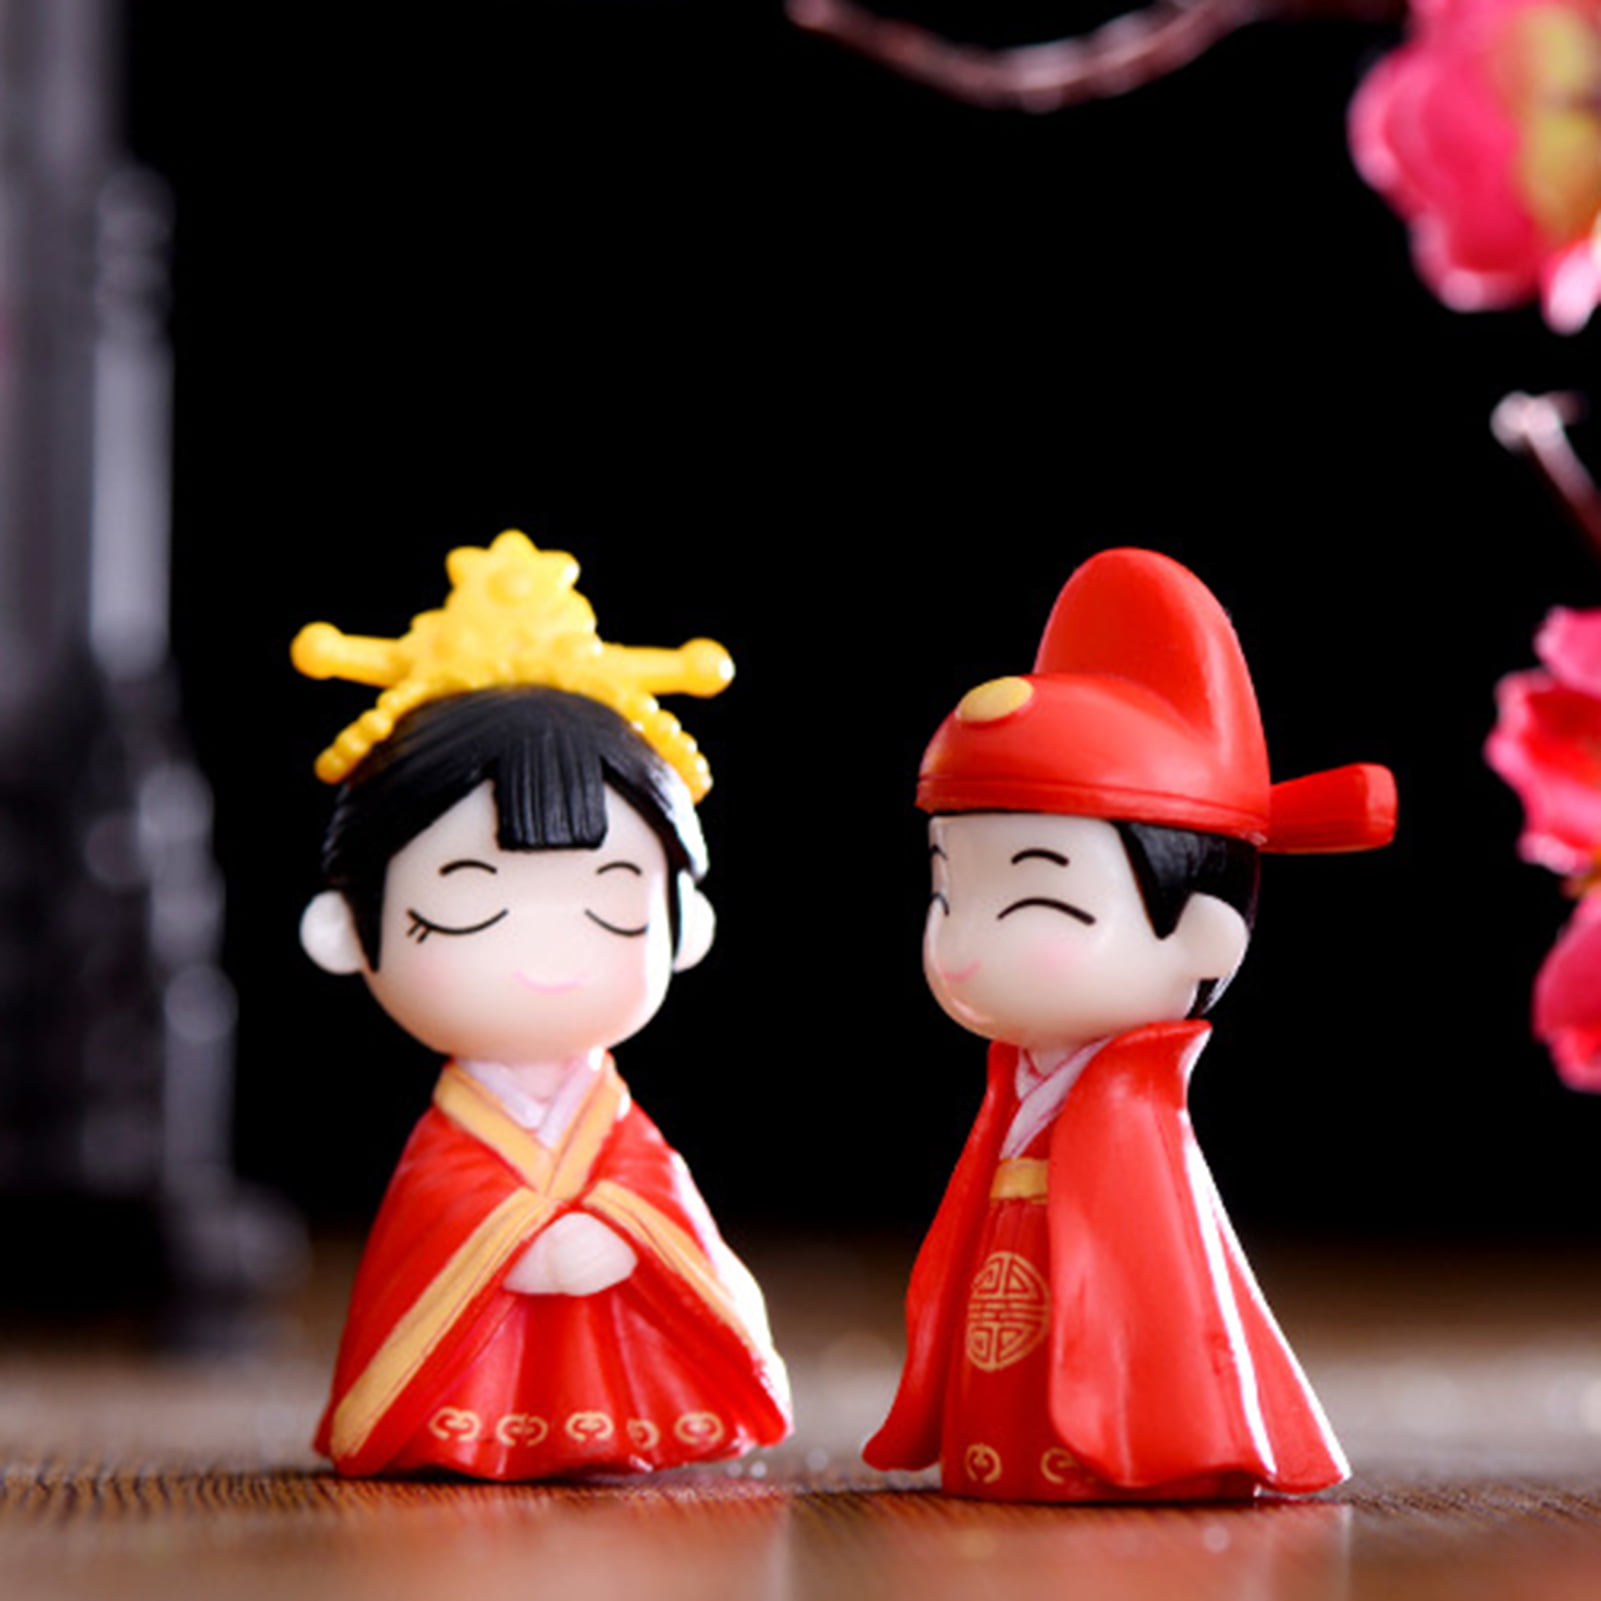 2pcs Couples in Chinese Tunic Suit Figurines Landscape Miniature Ornaments 